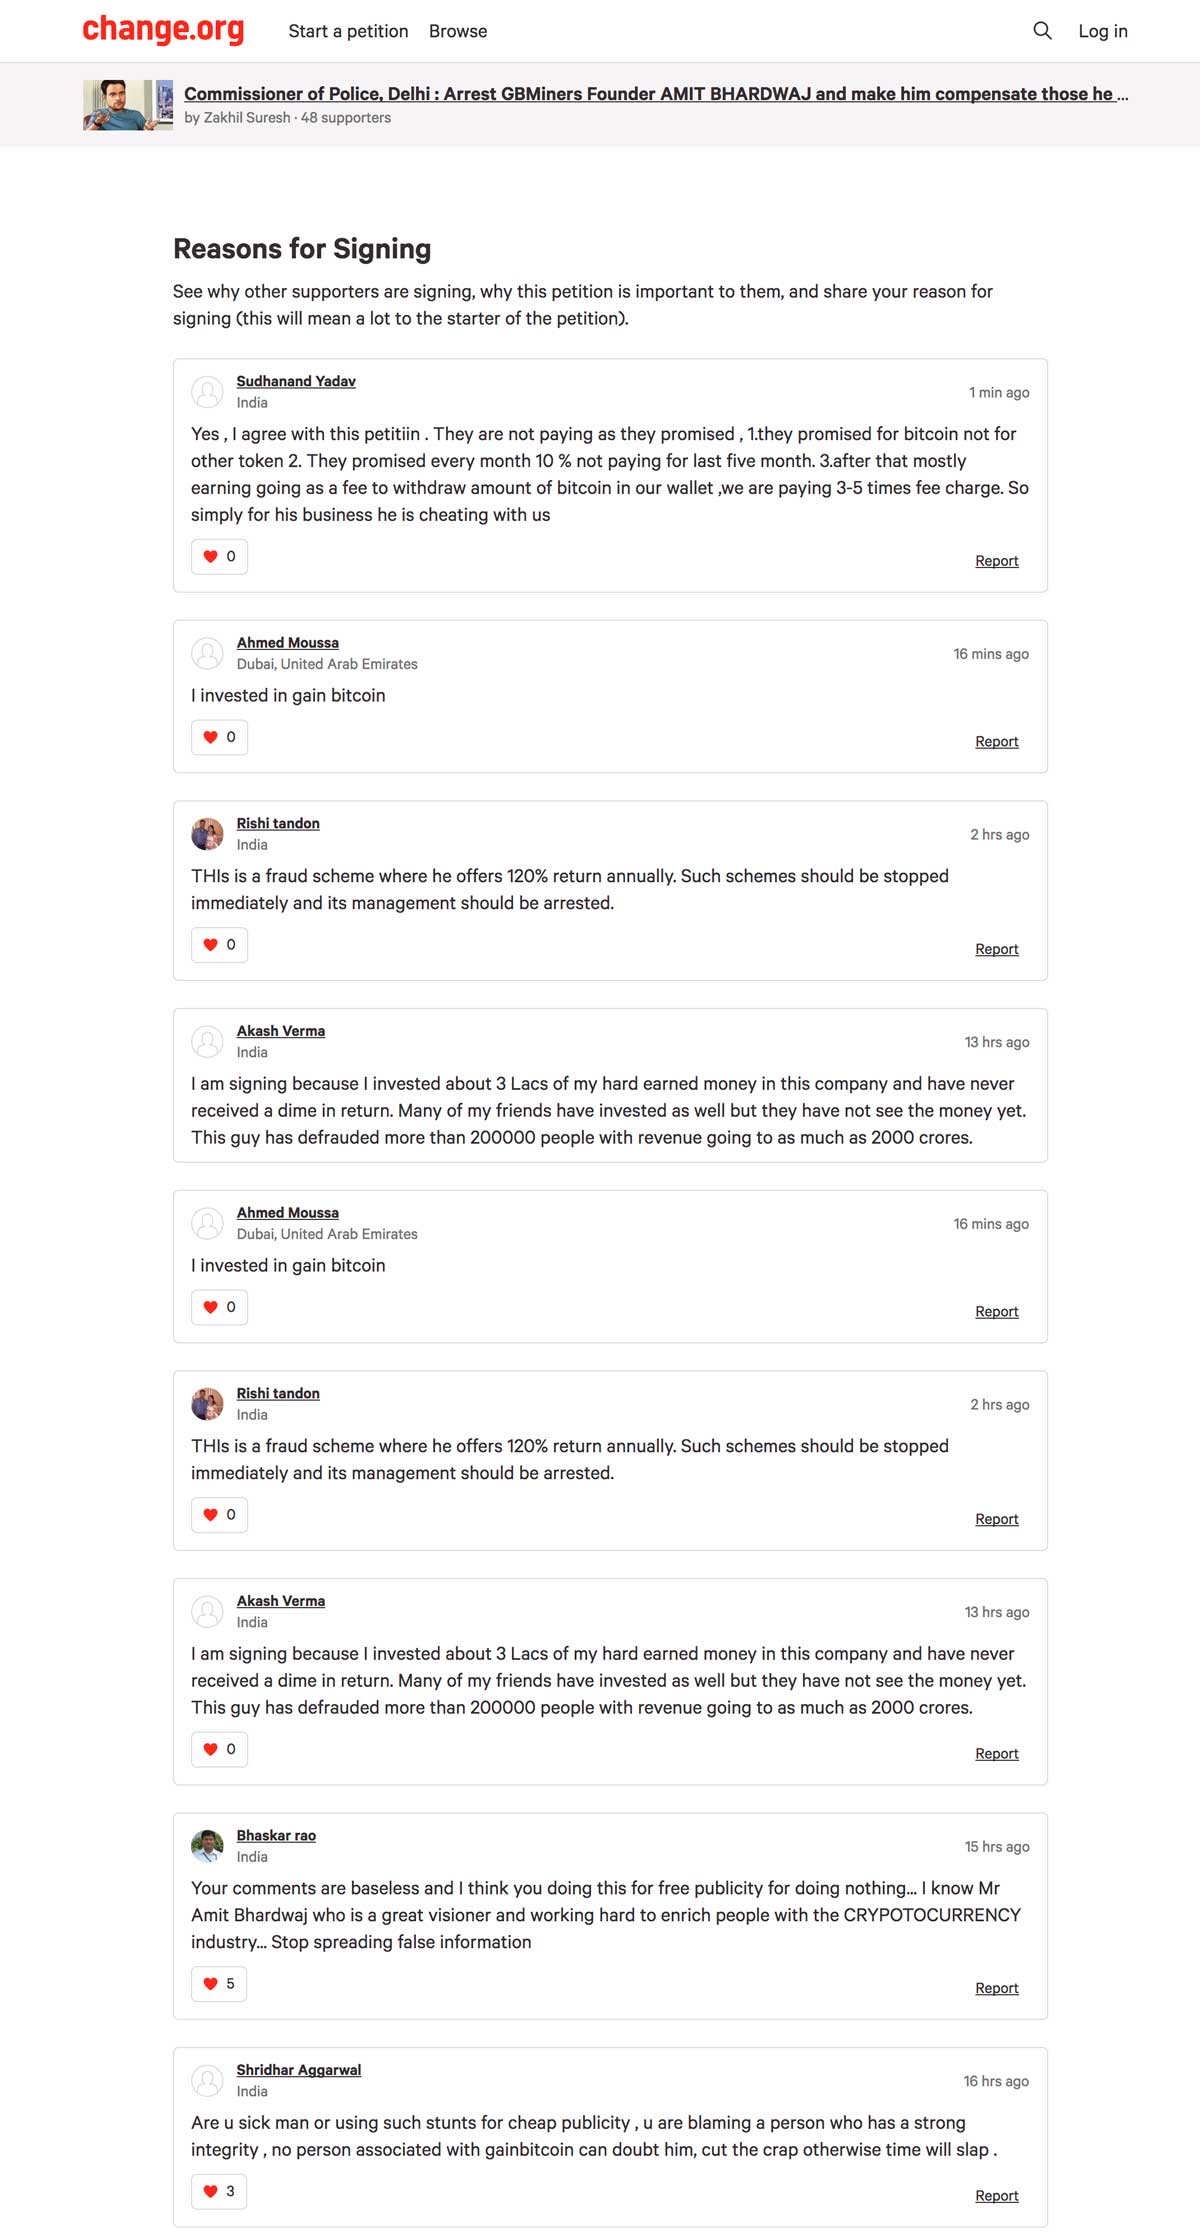 The comments section on Suresh's Change.org petition page